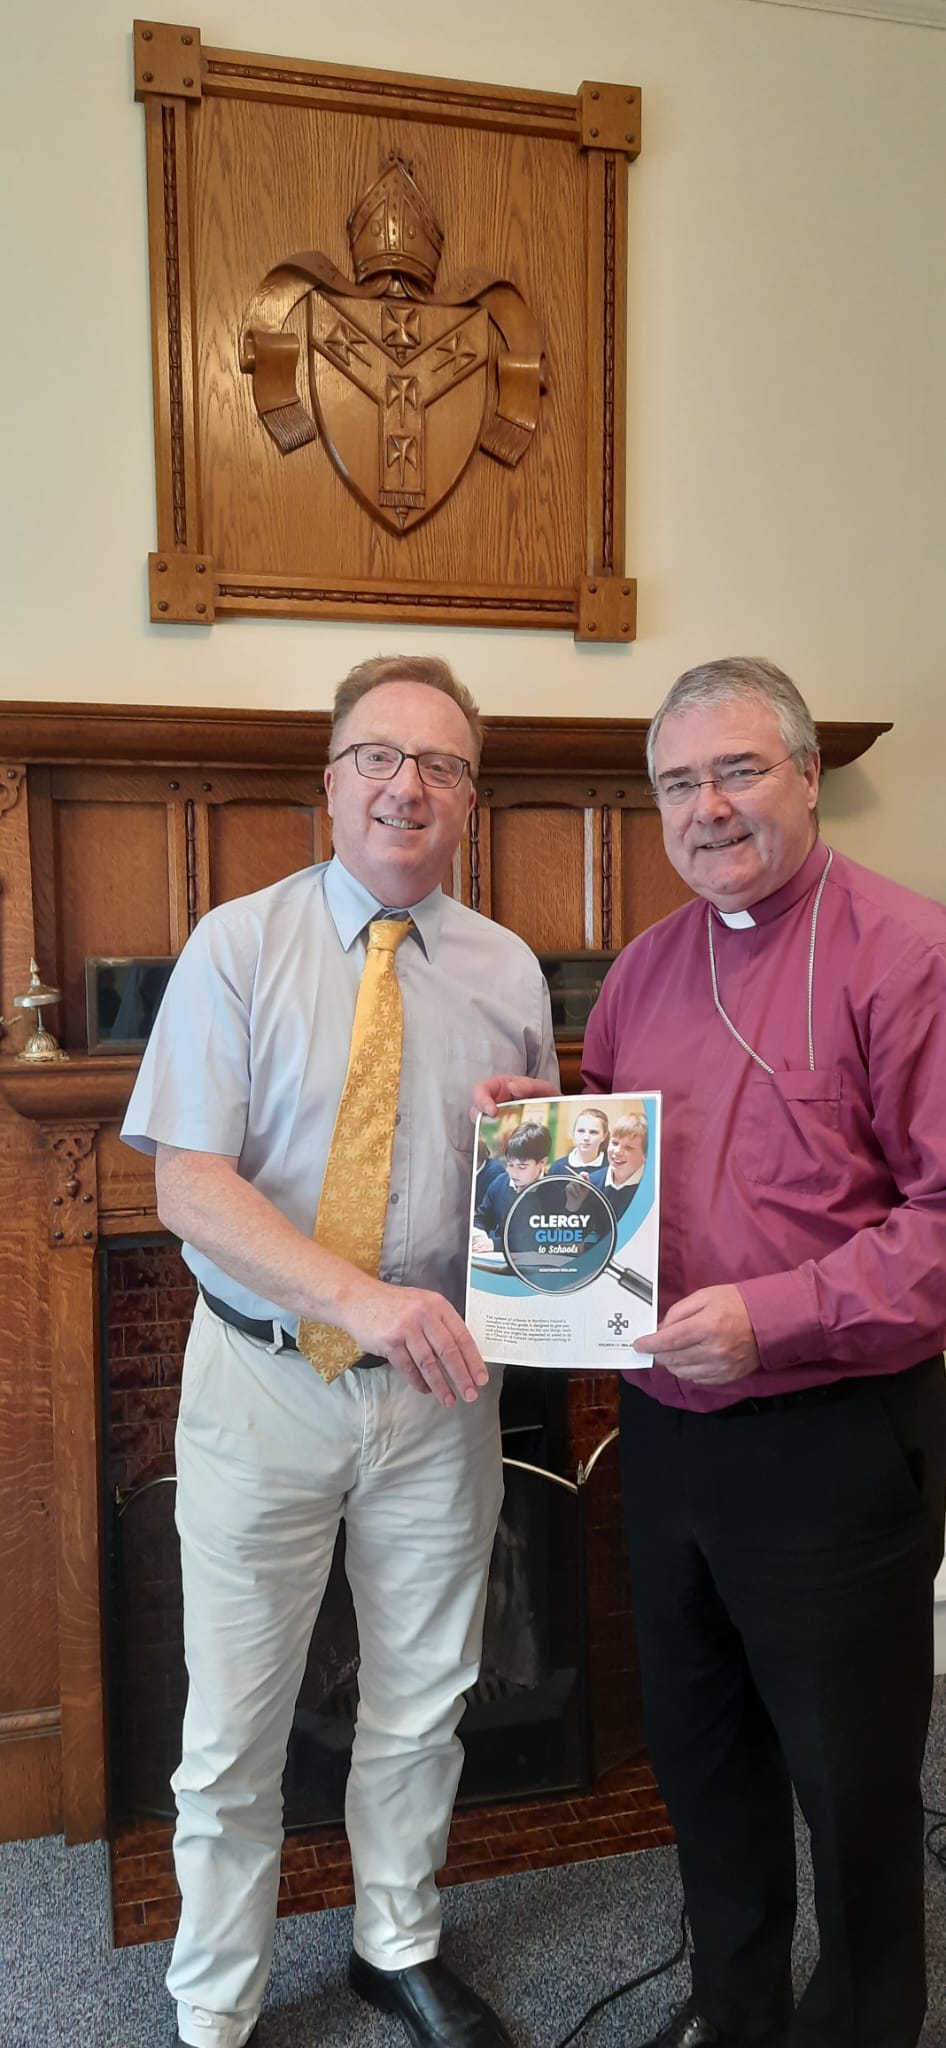 Archbishop John McDowell, pictured with Dr Peter Hamill from the Board of Education, launches the Clergy Guide to Schools.